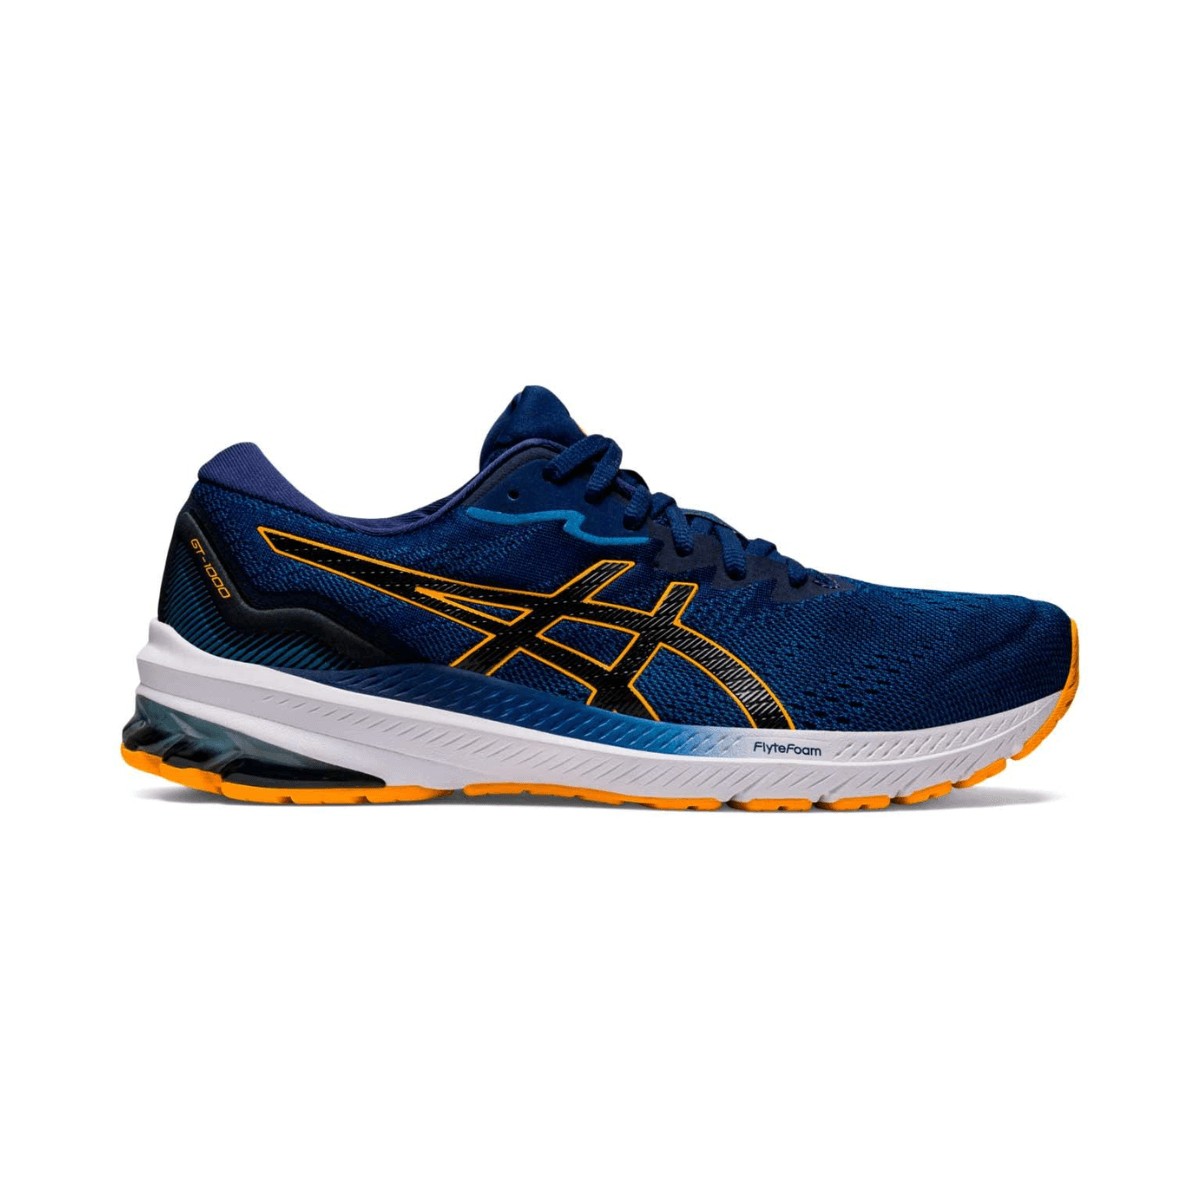 Asics GT-1000 11 Shoes Blue White AW22, Size 44,5 - EUR